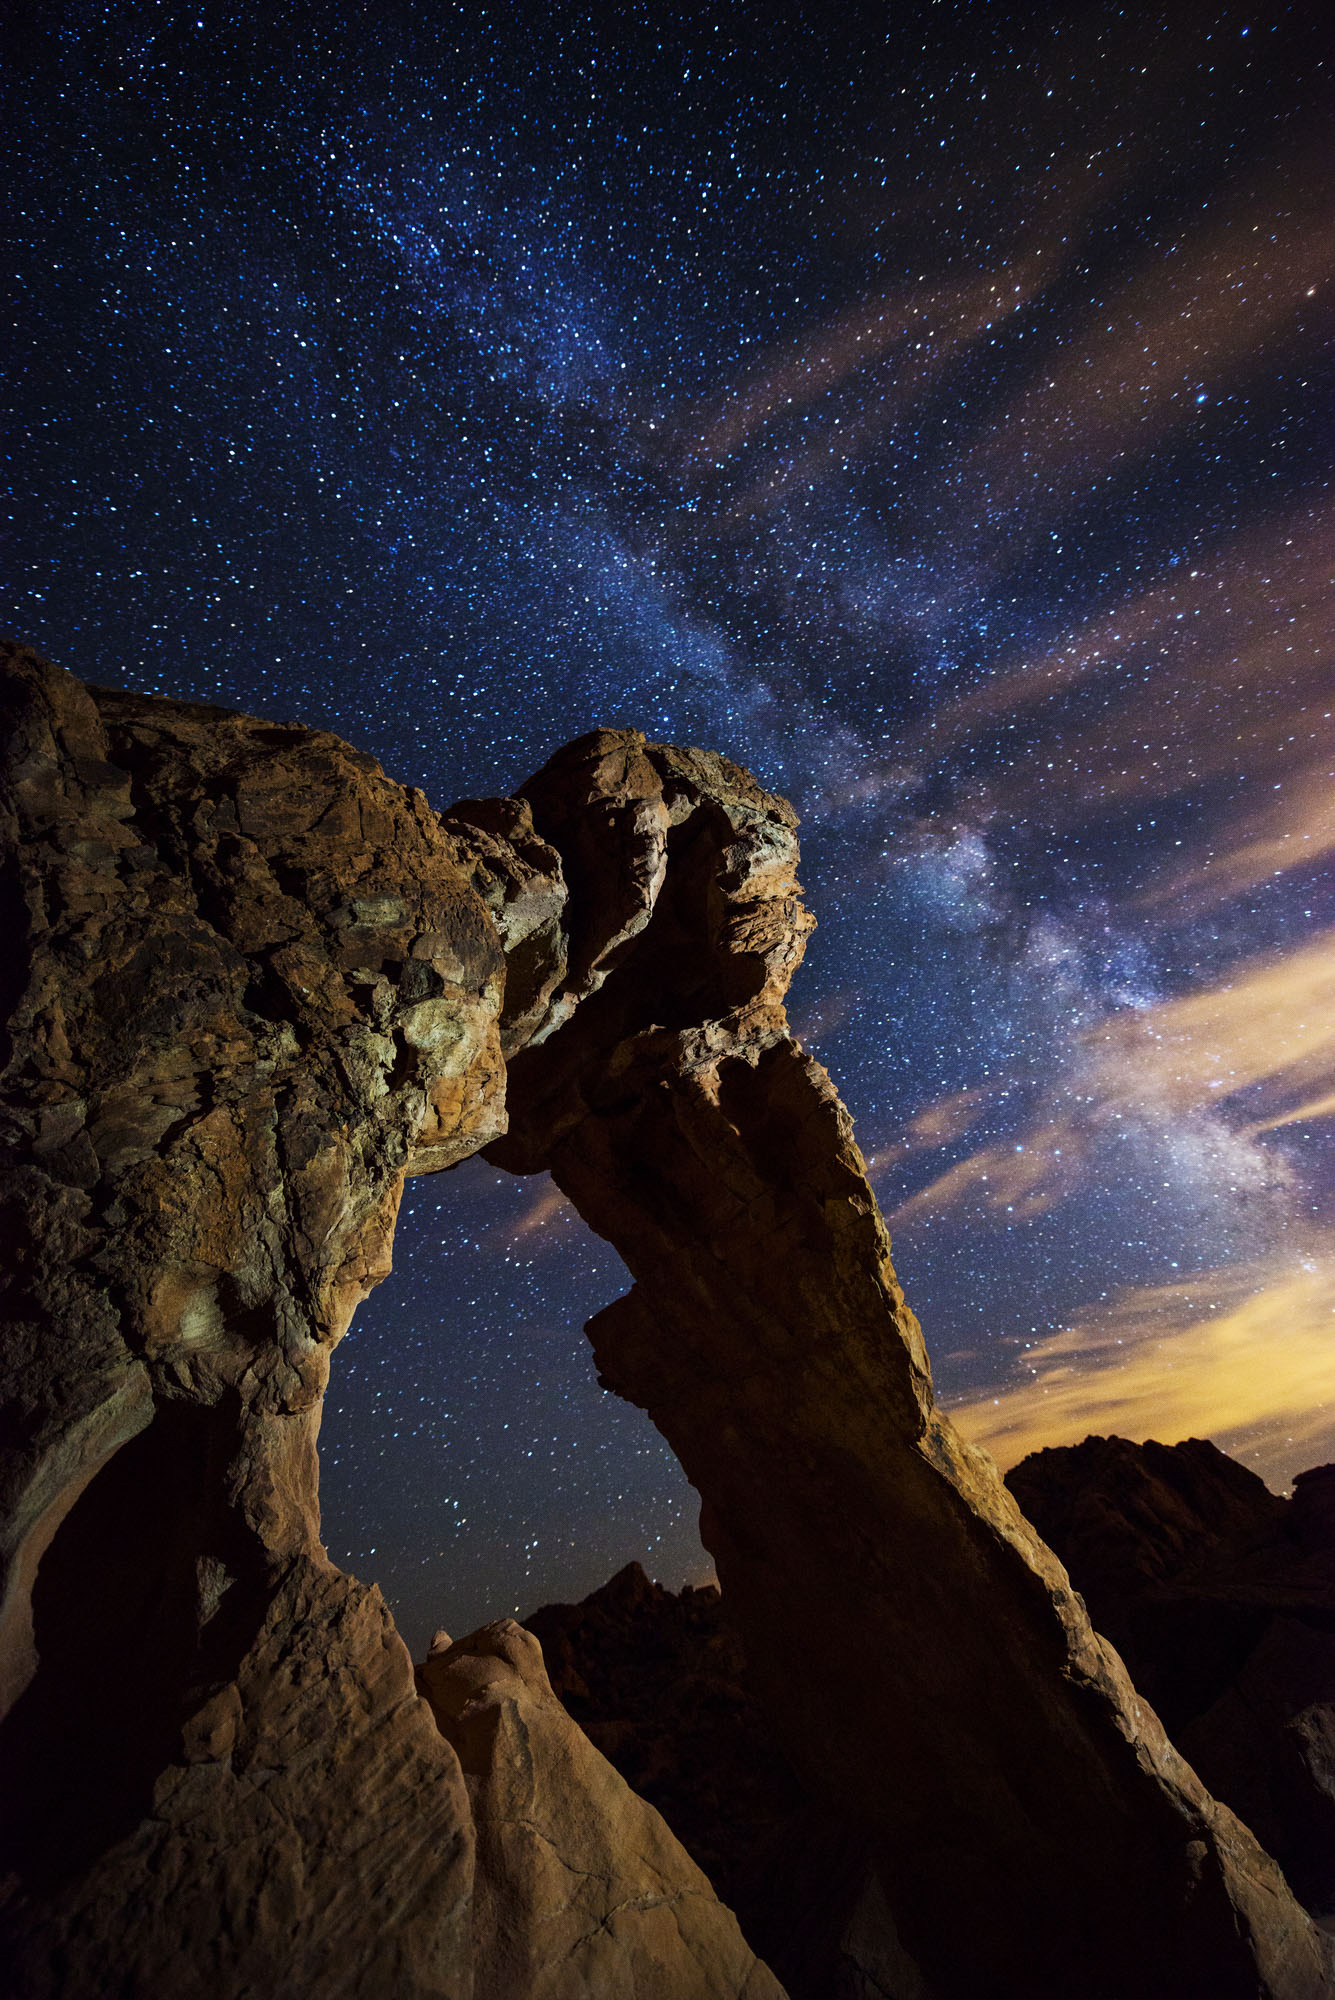 Elephant Rock illuminated at night under the Milky Way in Valley of Fire State Park, Nevada.